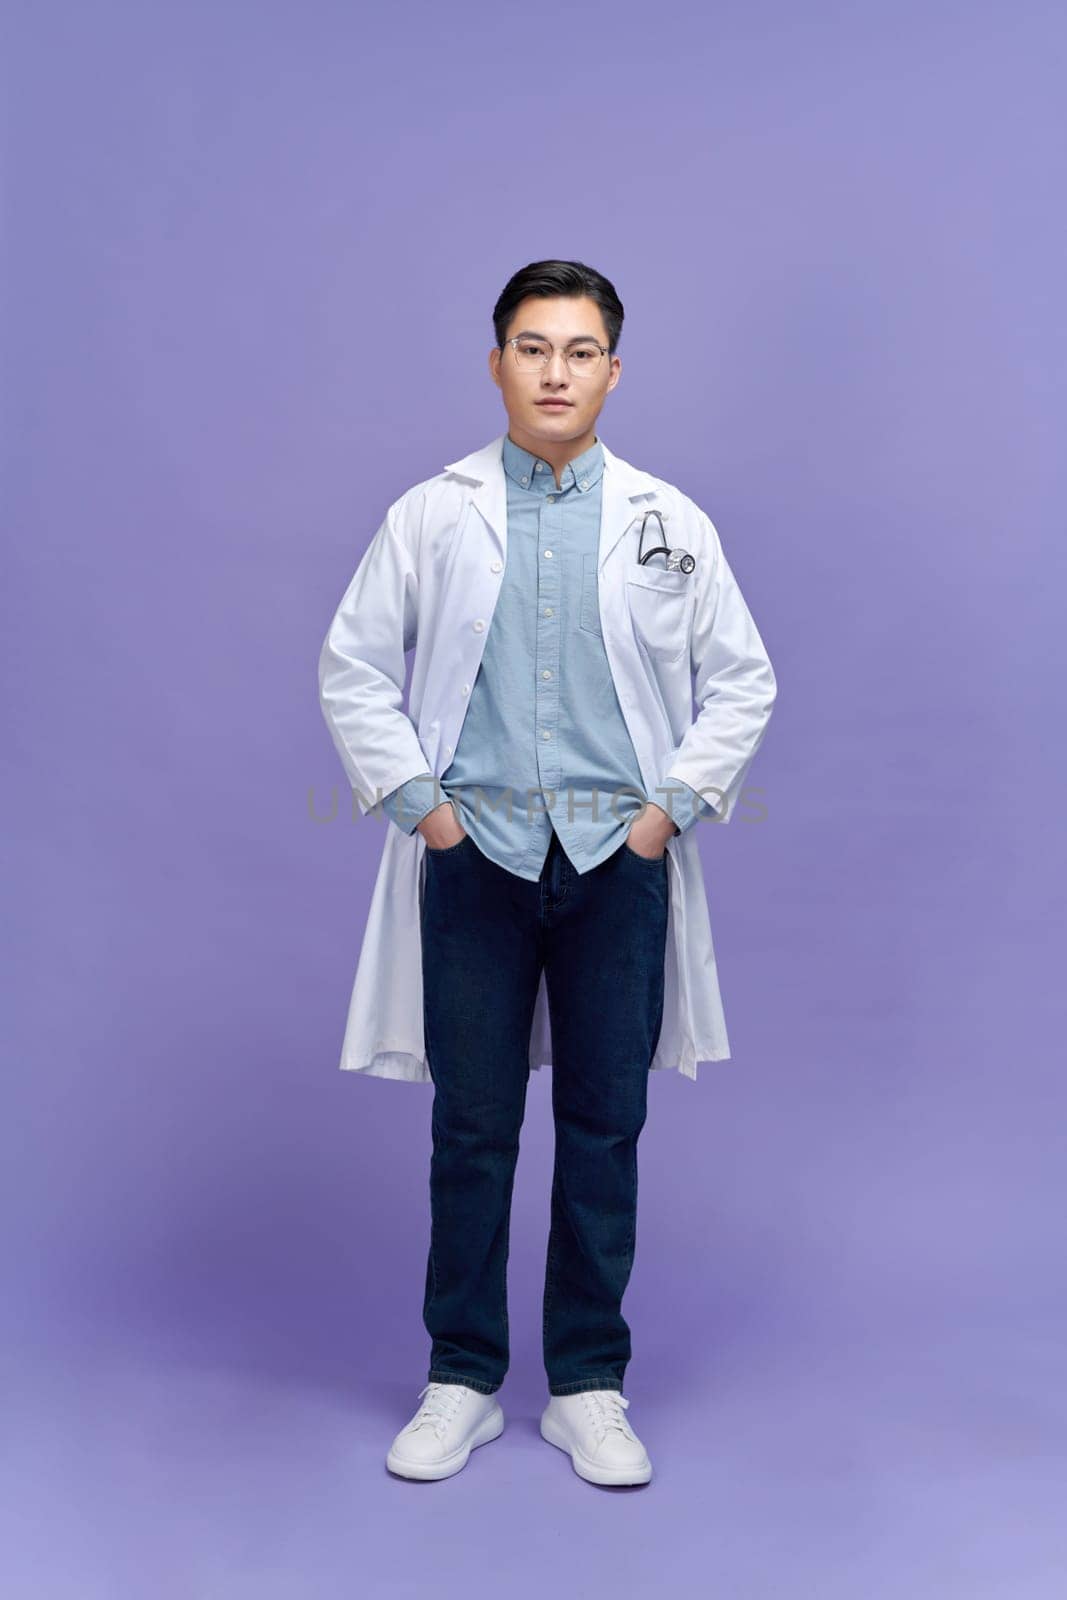 Portrait of male confident doctor over purple background studio, healthcare and Medical technology concept.